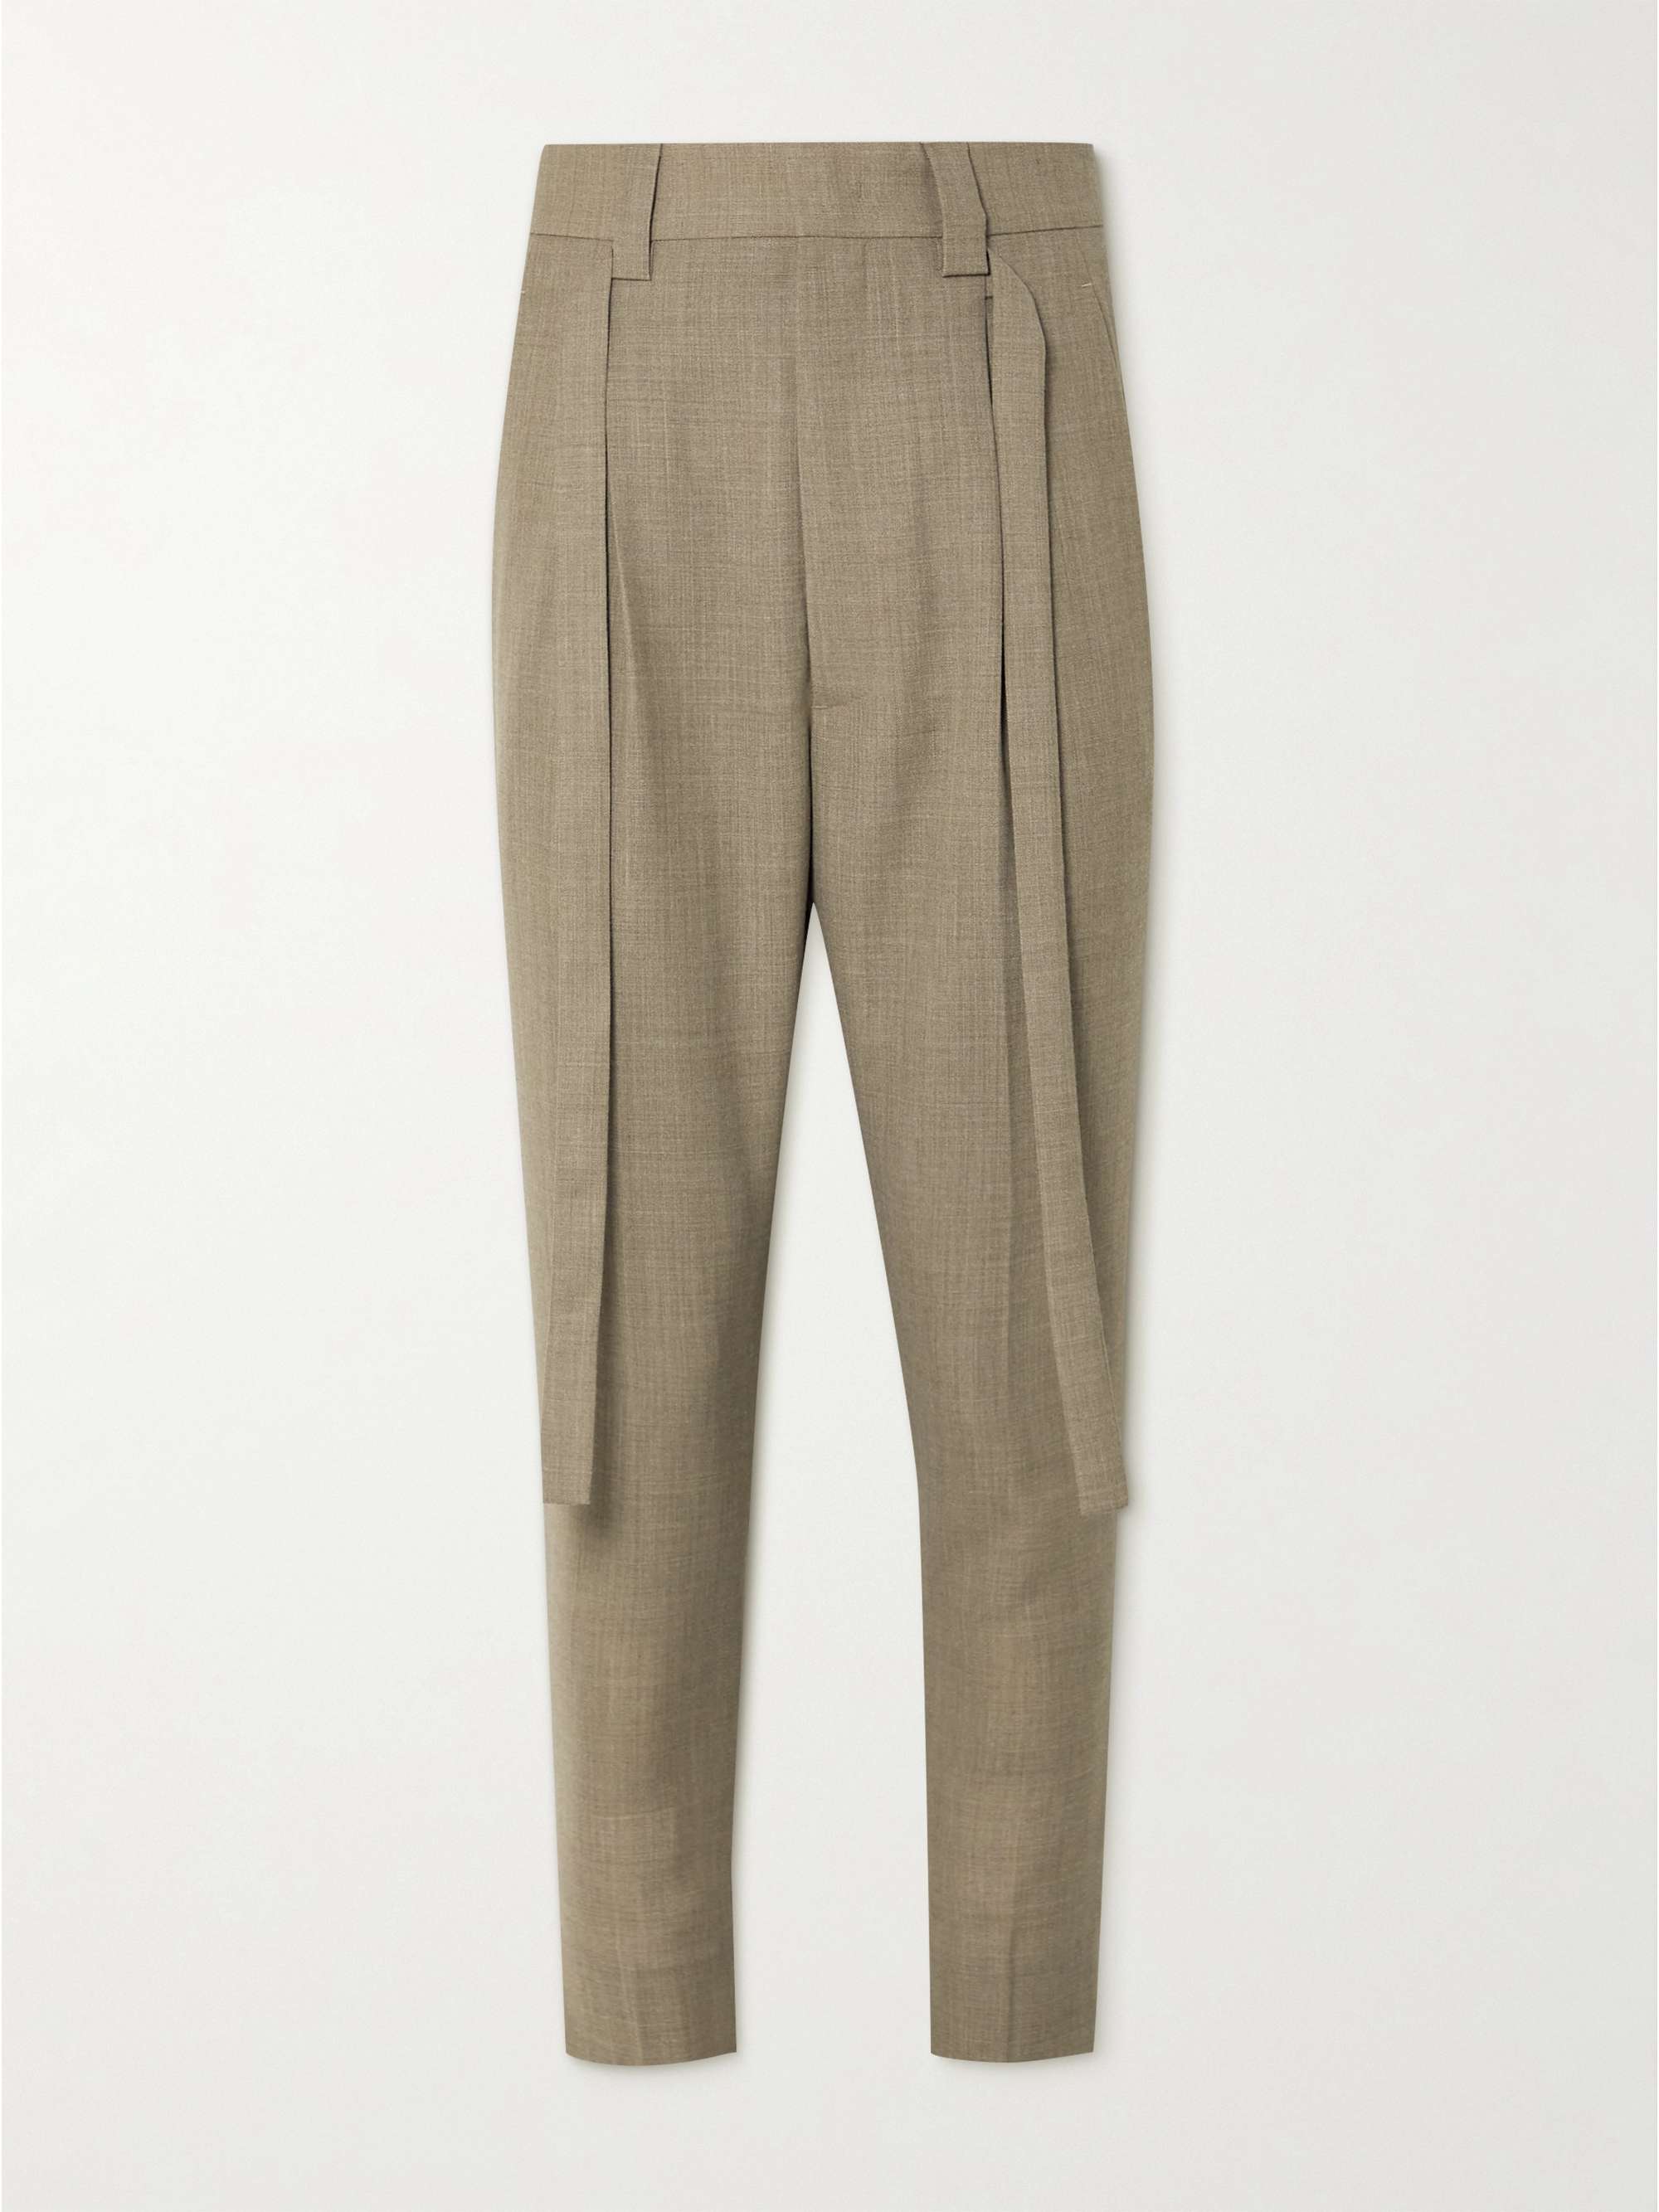 FEAR OF GOD Tapered Pleated Belted Wool Trousers